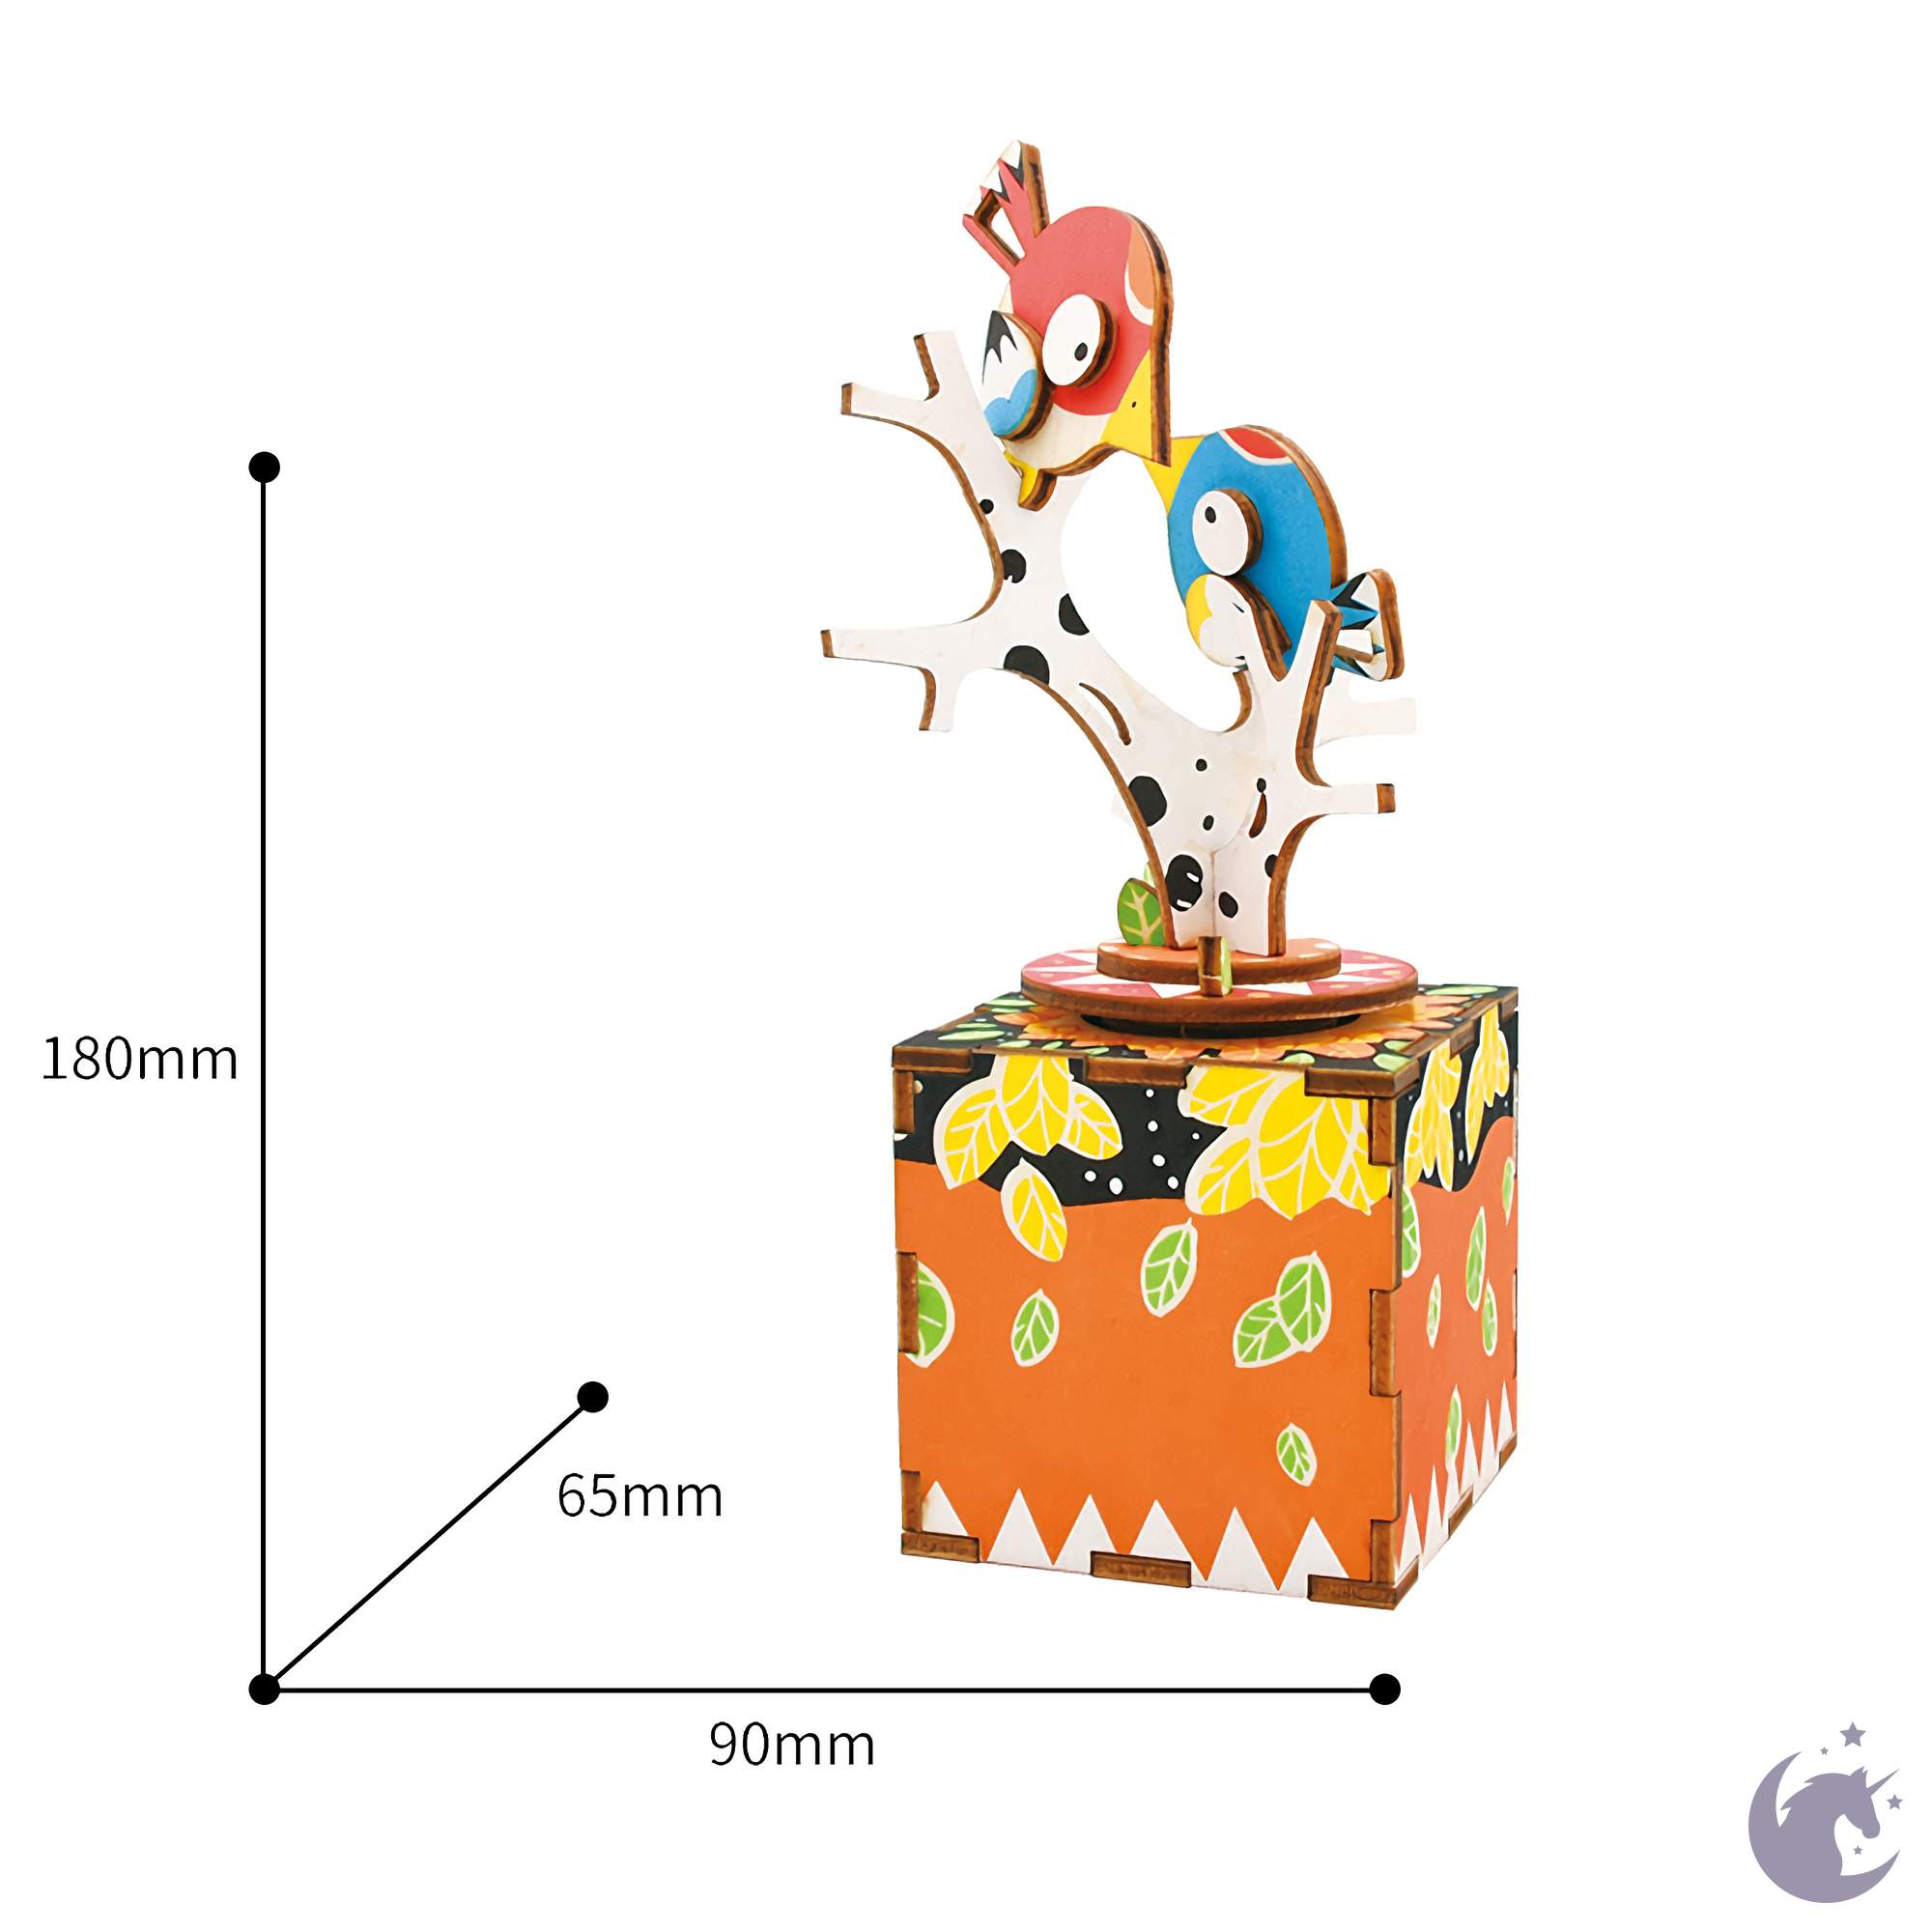 unicorntoys robotime rolife bird and tree diy music box 3d wooden puzzle birthday gift kits for teens AM301